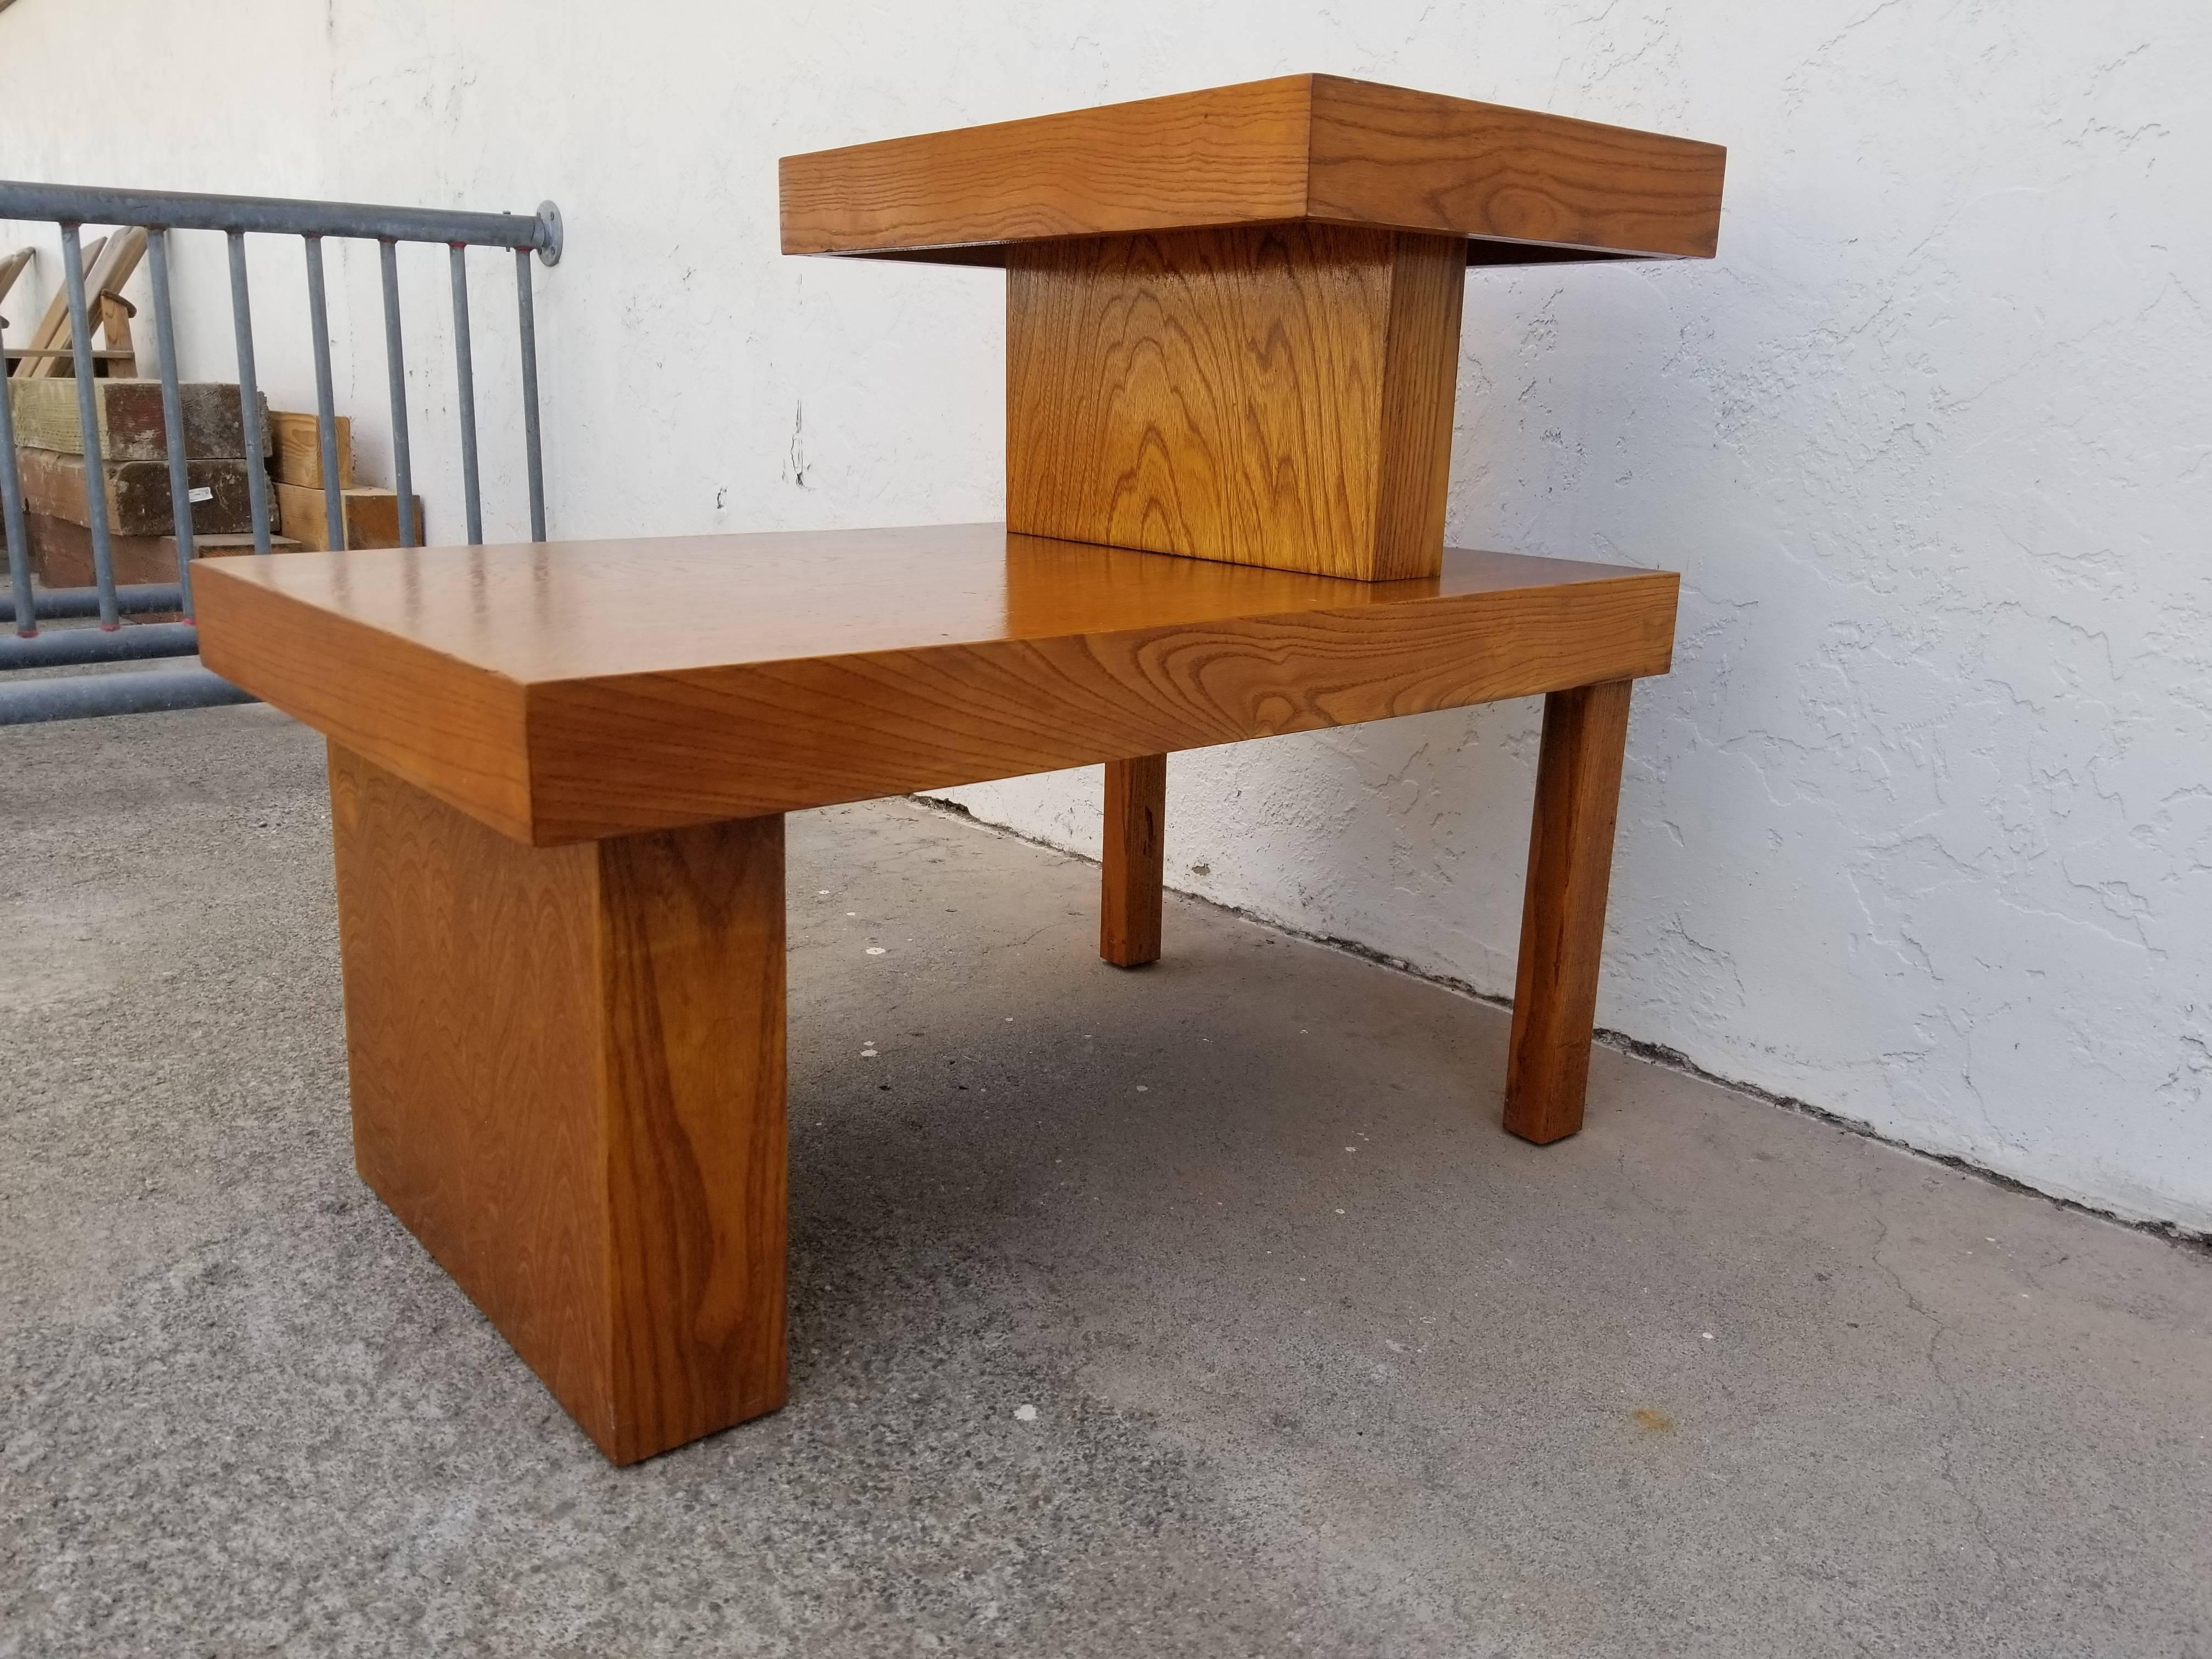 Bold architectural design and beautiful wood grain to this 1940's 50's industrial design end table. Notice the variation of dimensional proportions and off-sets to design. Lower table height measures 15.5